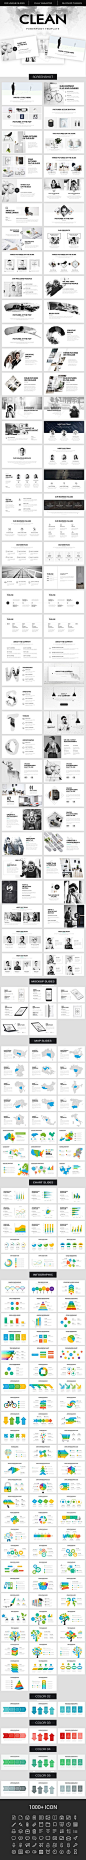 Clean Powerpoint Template - Creative PowerPoint Templates: 